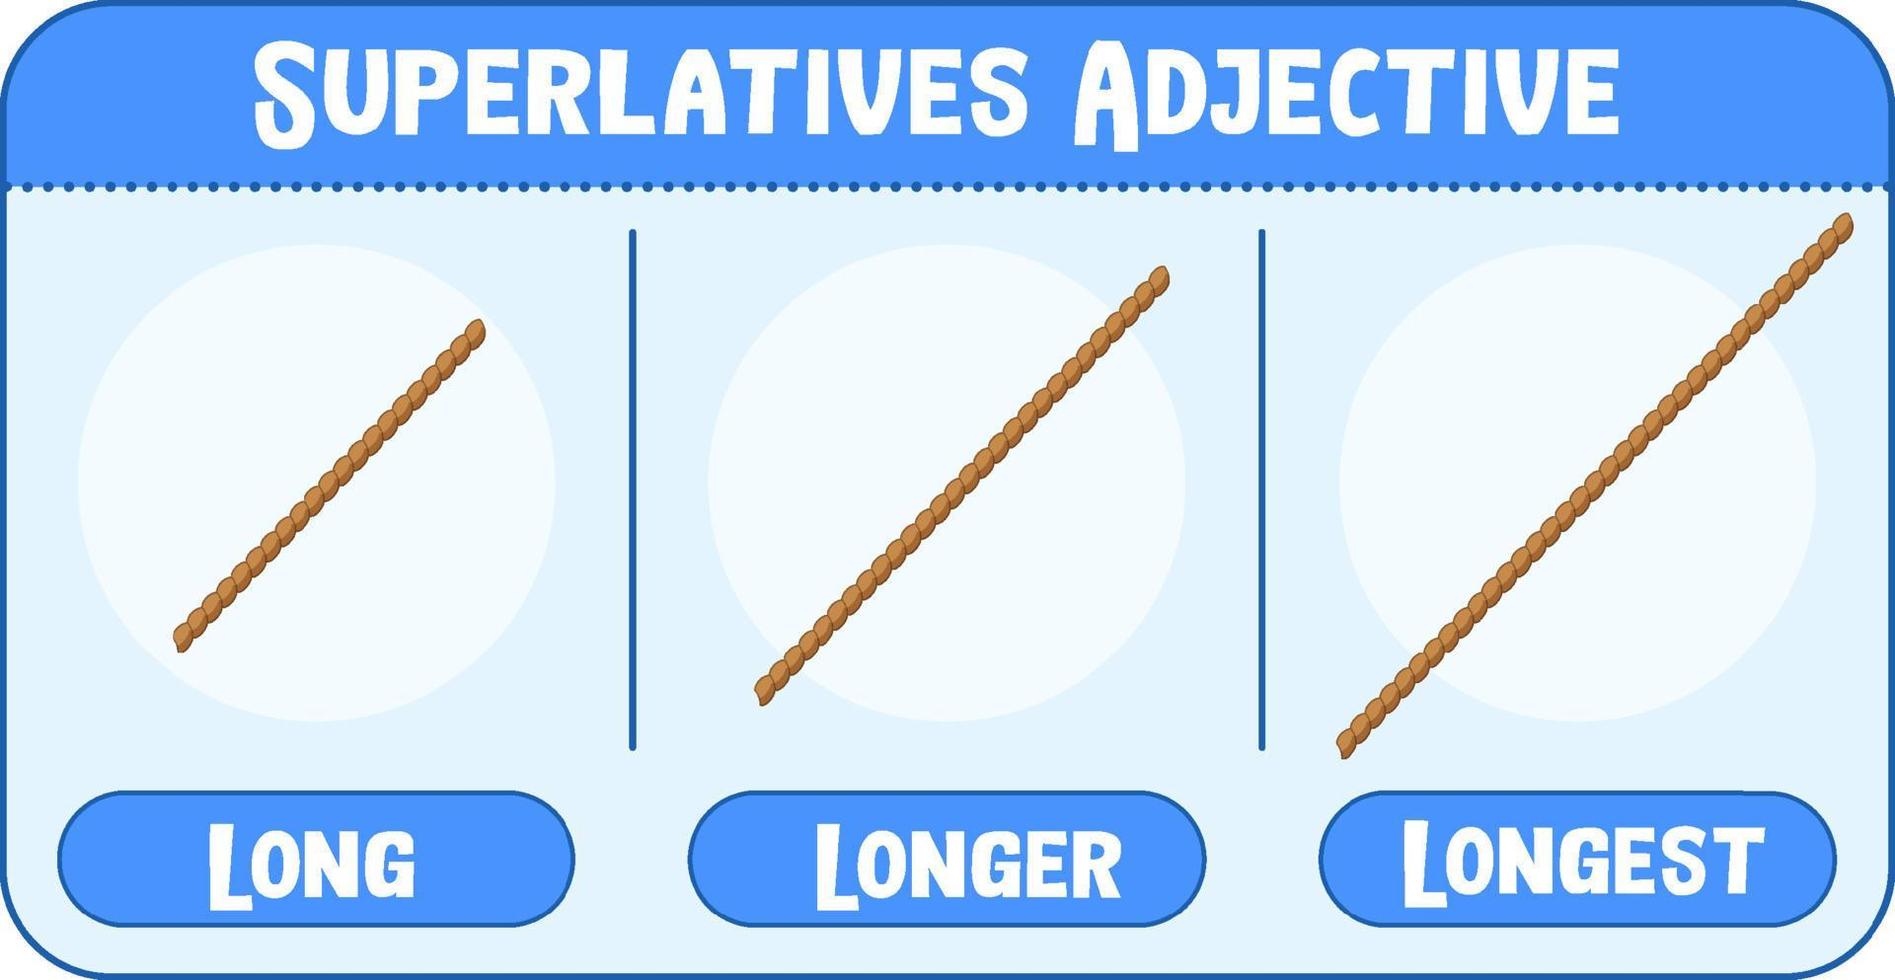 Superlatives Adjectives for word long vector